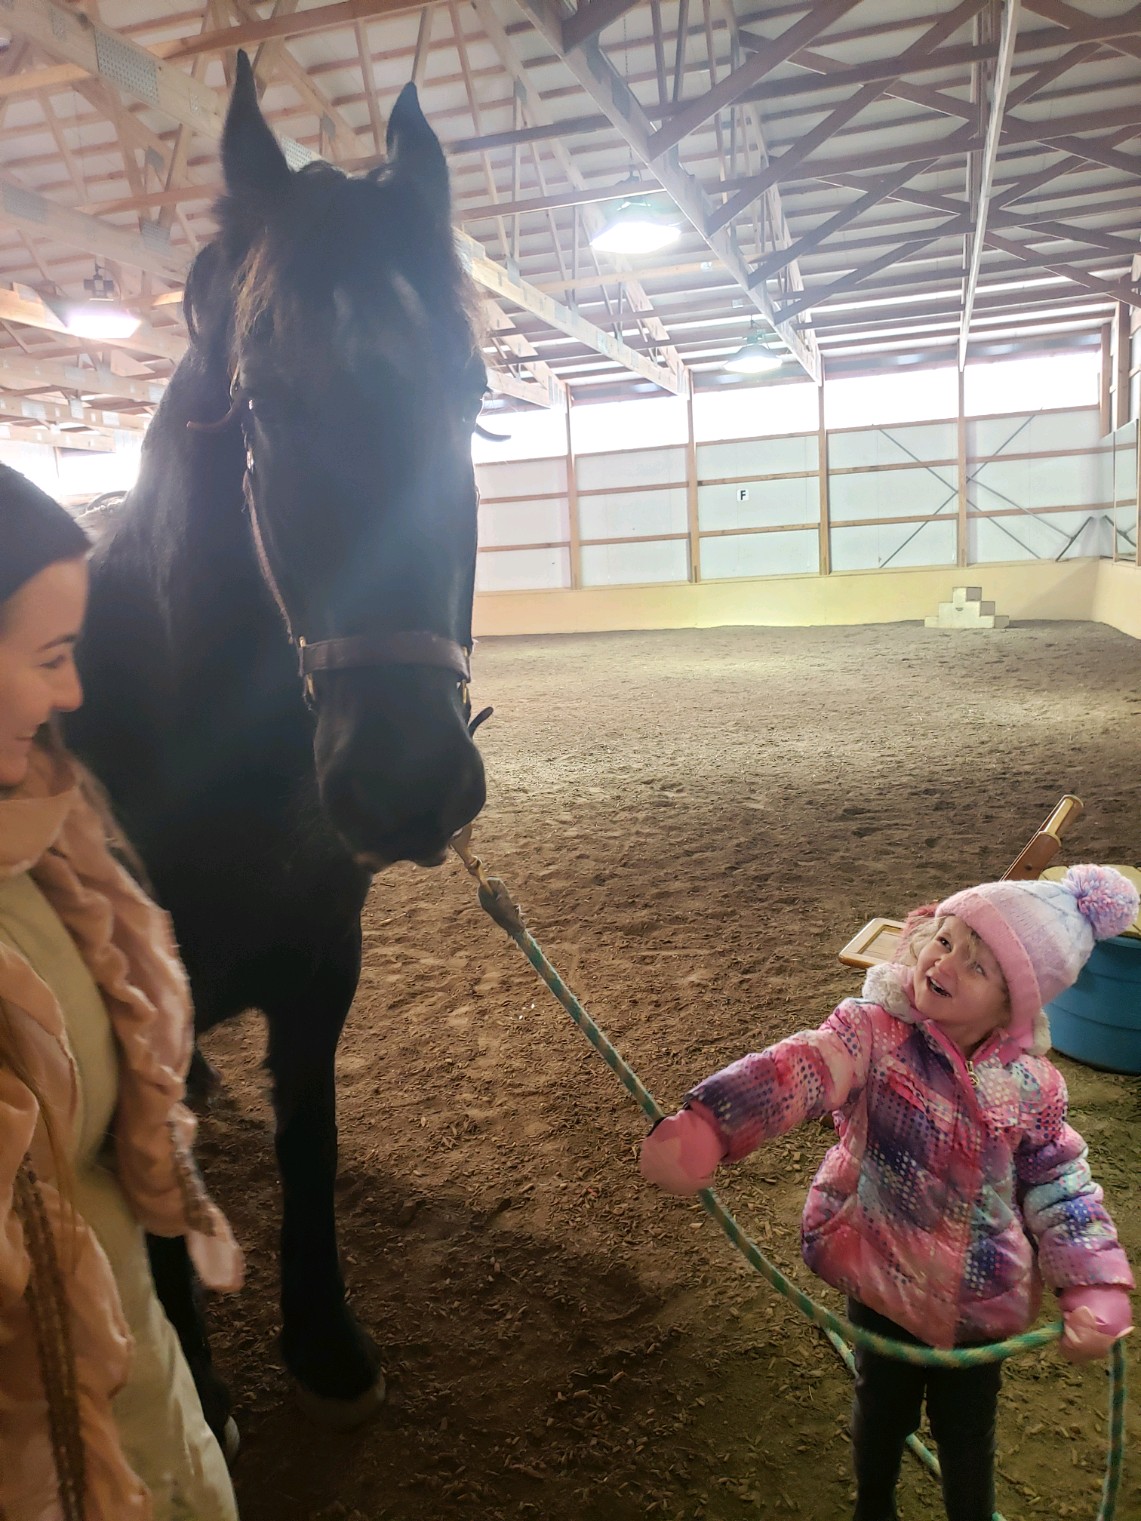 Boriana trains foster kids on how to interact with horses